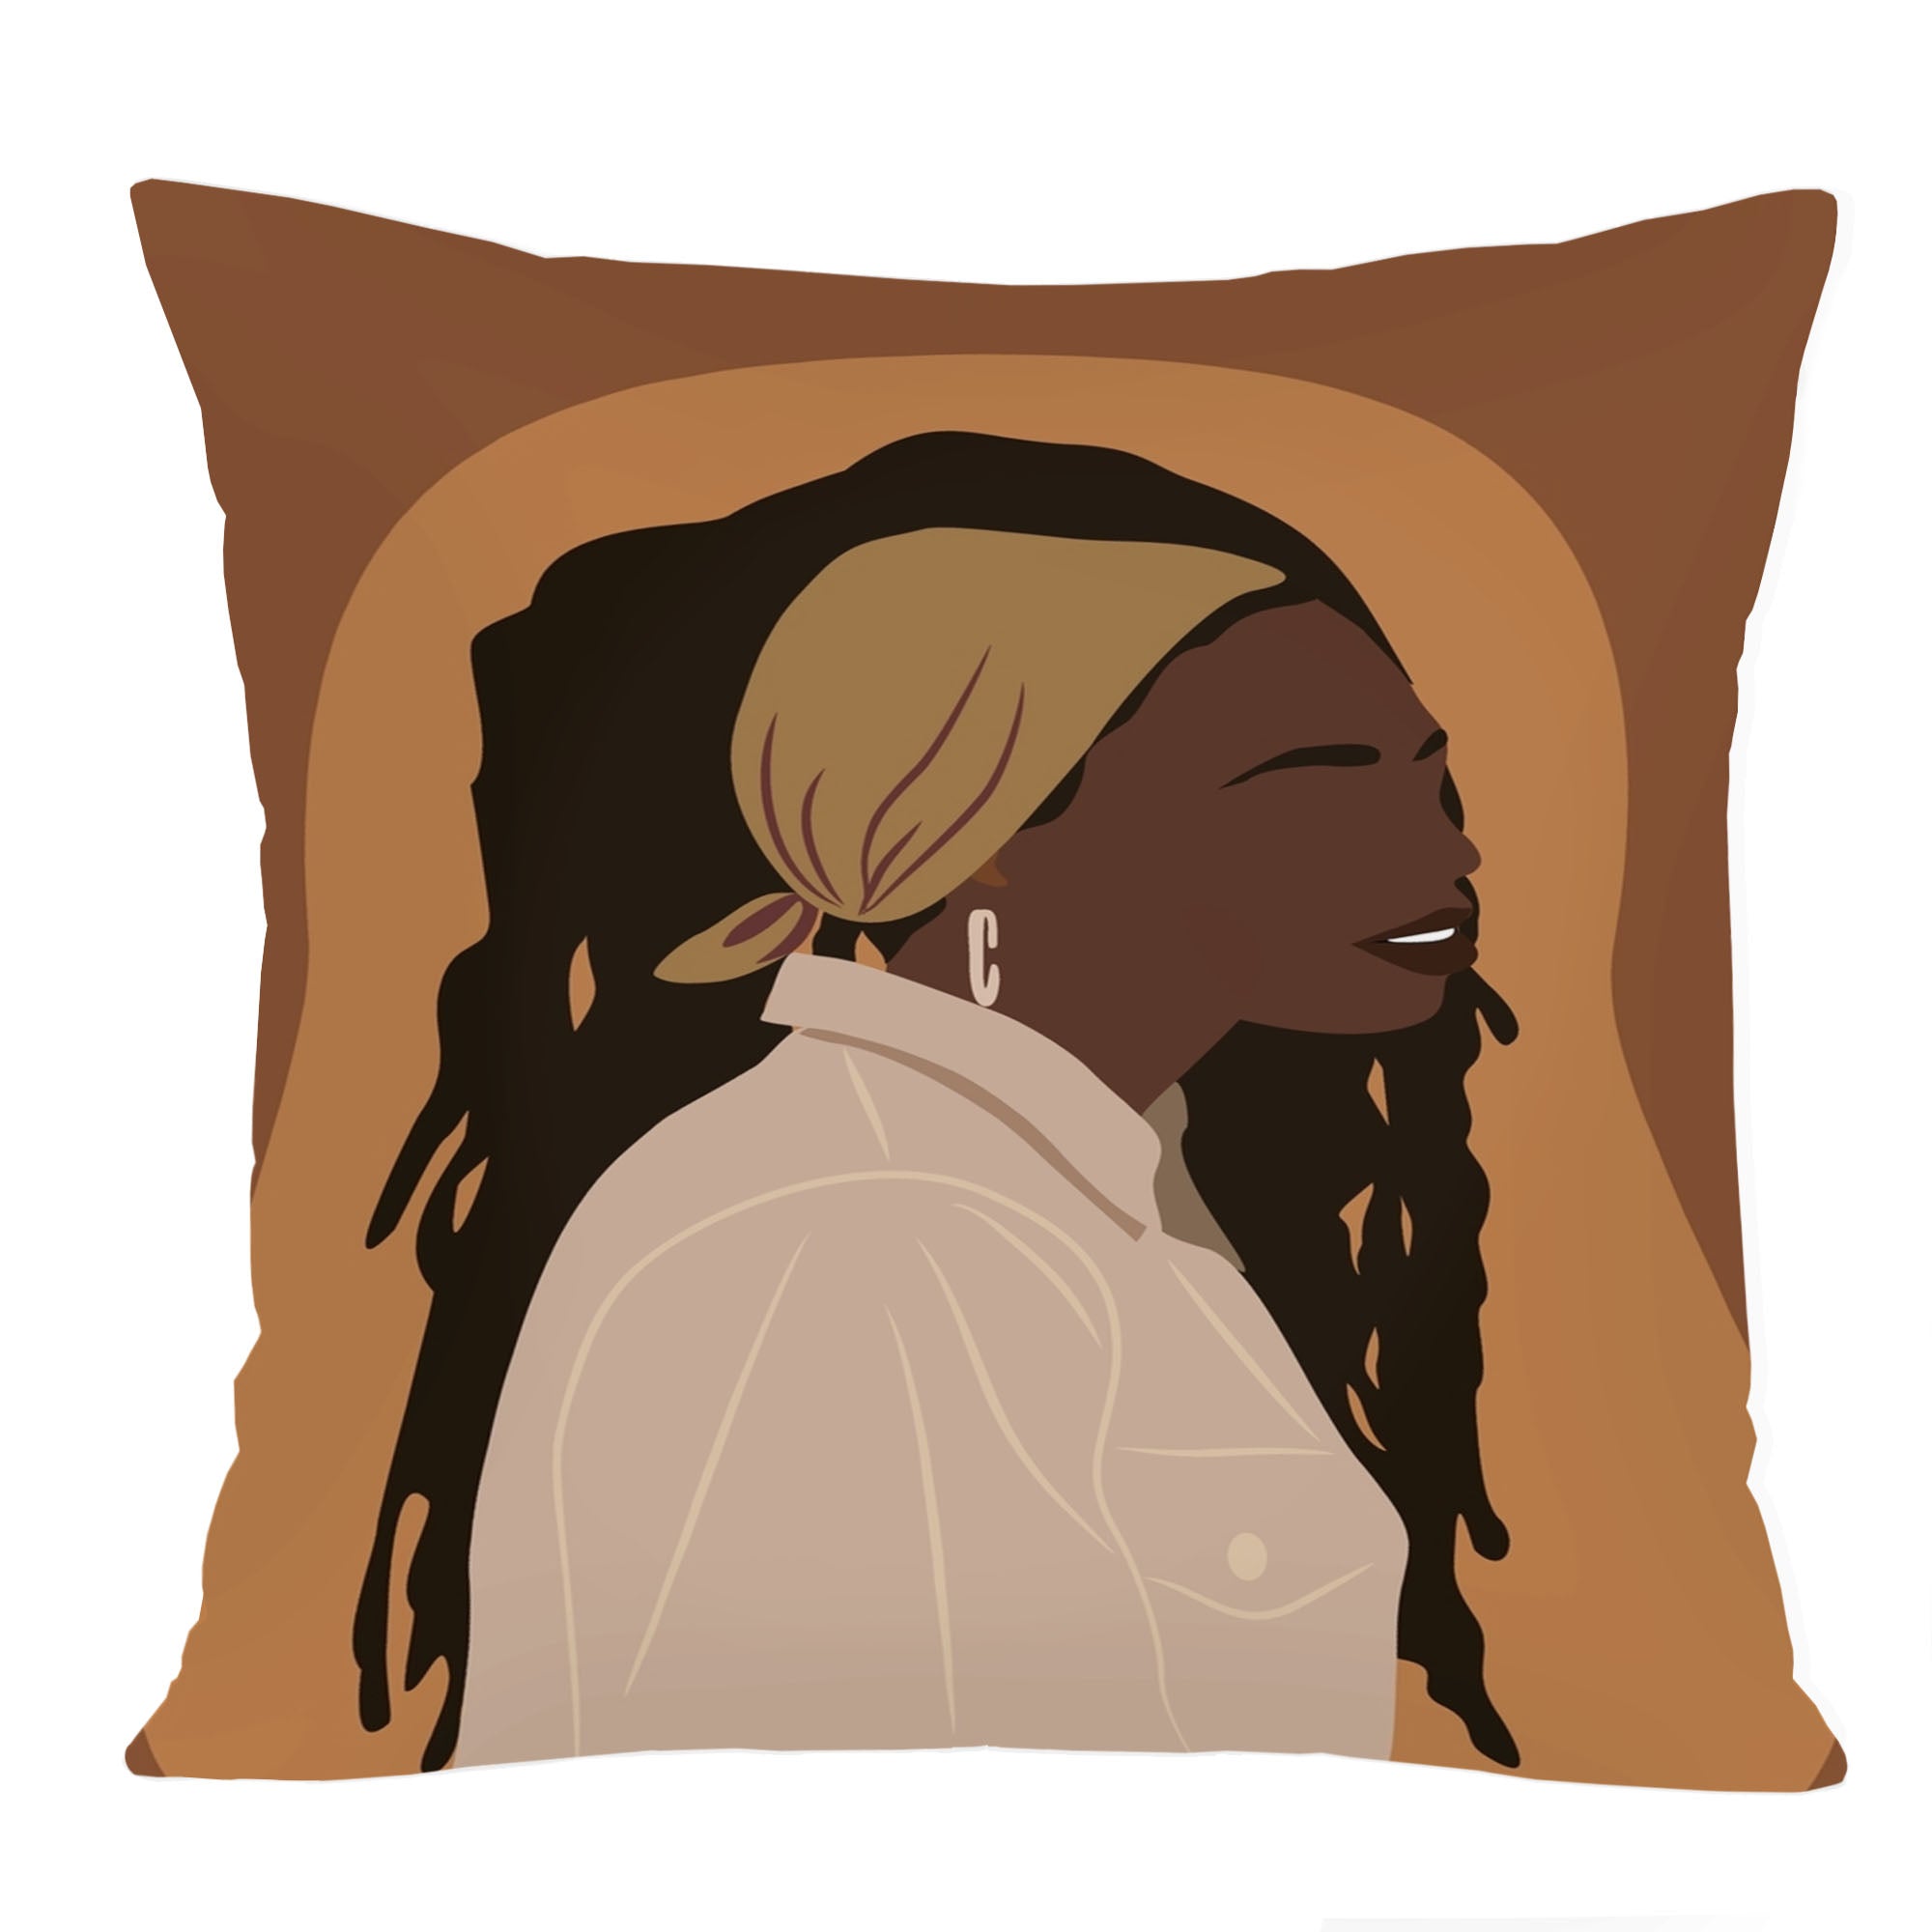 Ethan Taylor People and Portraits Throw Pillow Soft Cushion Cover 'African American Woman Portrait Portraits Female' Bohemian Pattern Decorative Square Accent Pillow Case, 16x16 Inches, Brown, Orange - image 1 of 5